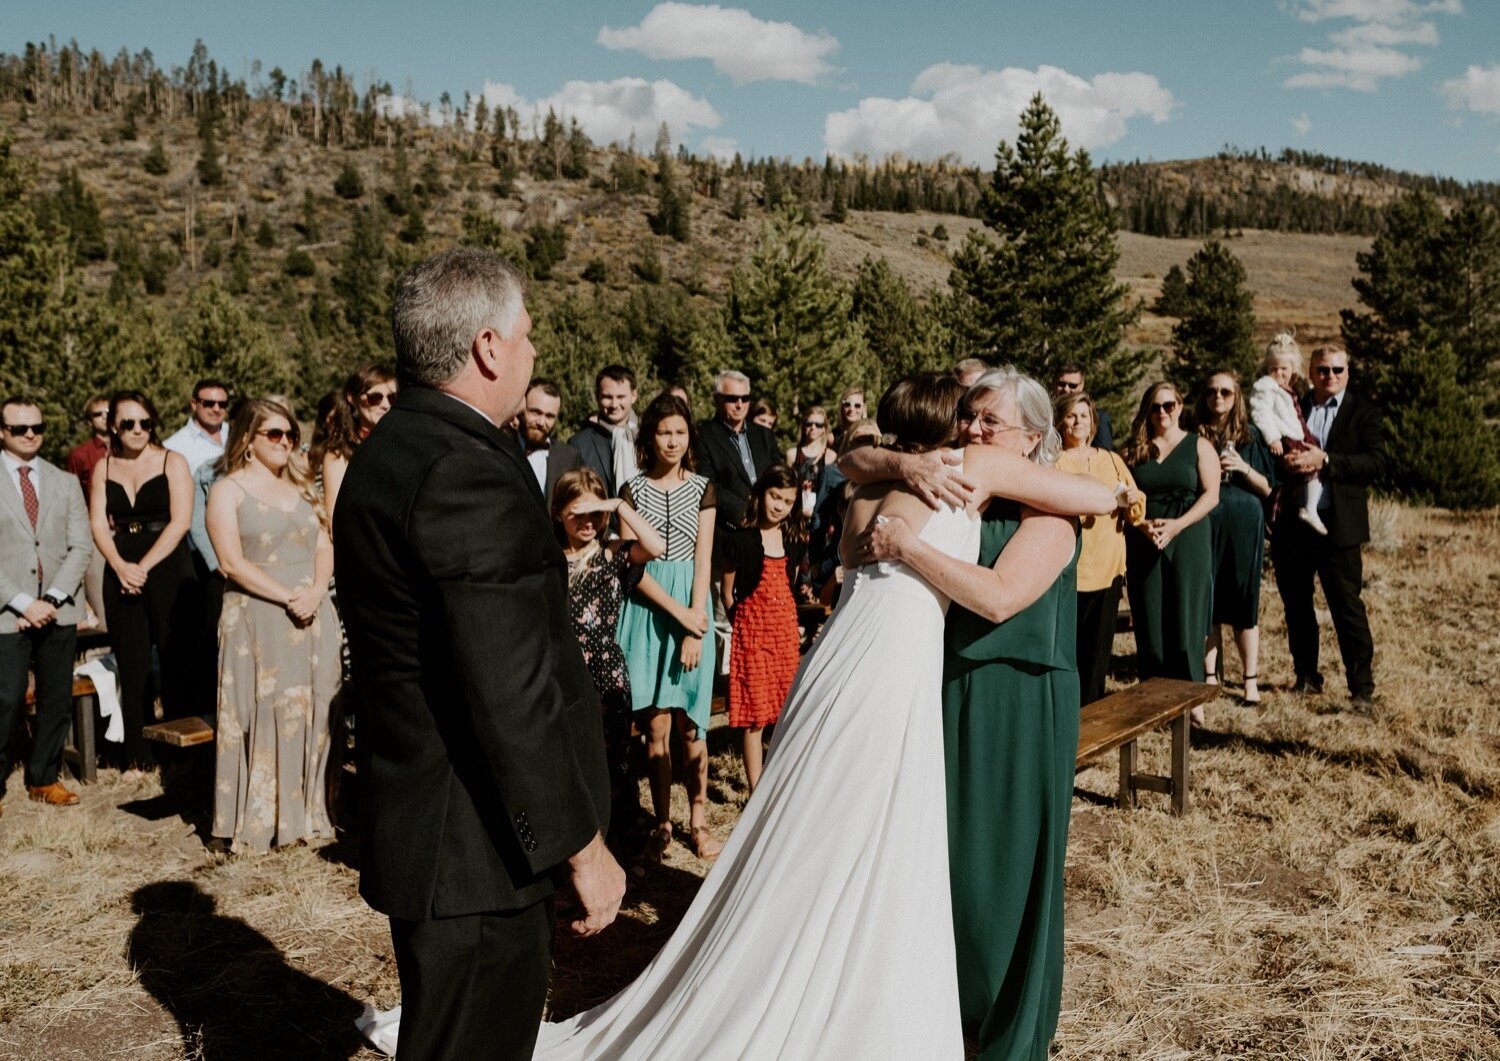  Father giving away bride, Windy Point Campground Wedding Colorado, Dillon Colorado Wedding, Colorado mountain wedding, Dillon Colorado Wedding Photographer, Colorado Wedding Photographer, Colorado mountain wedding venues, Colorado campground wedding